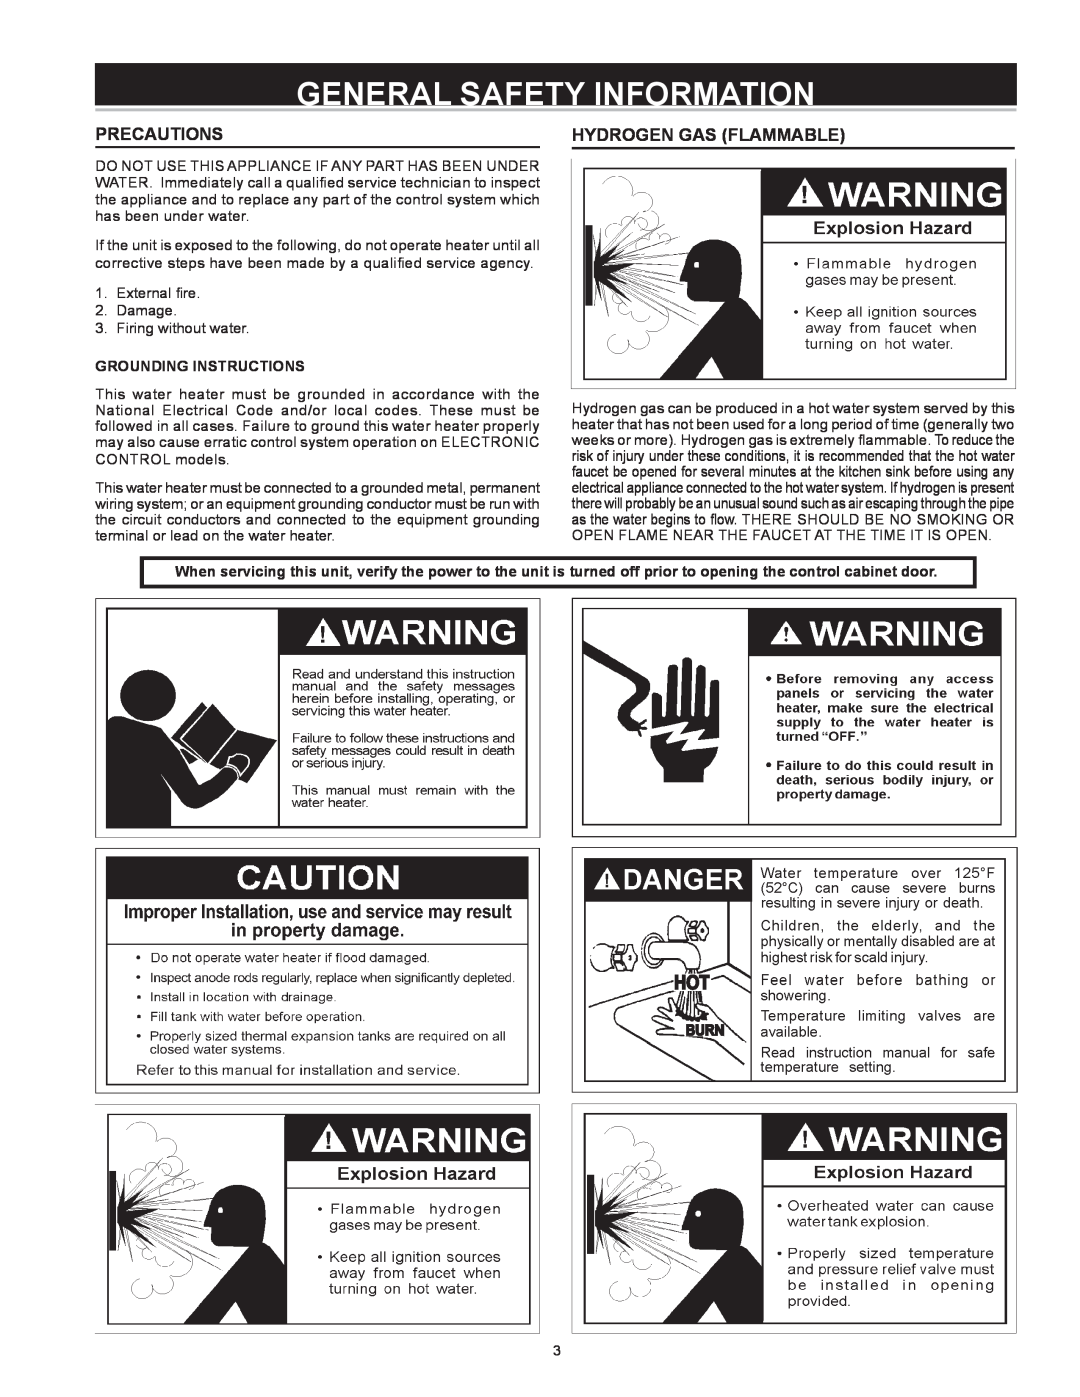 A.O. Smith Dve-52/80/120 General Safety Information, Precautions, Hydrogen Gas Flammable, Grounding Instructions 